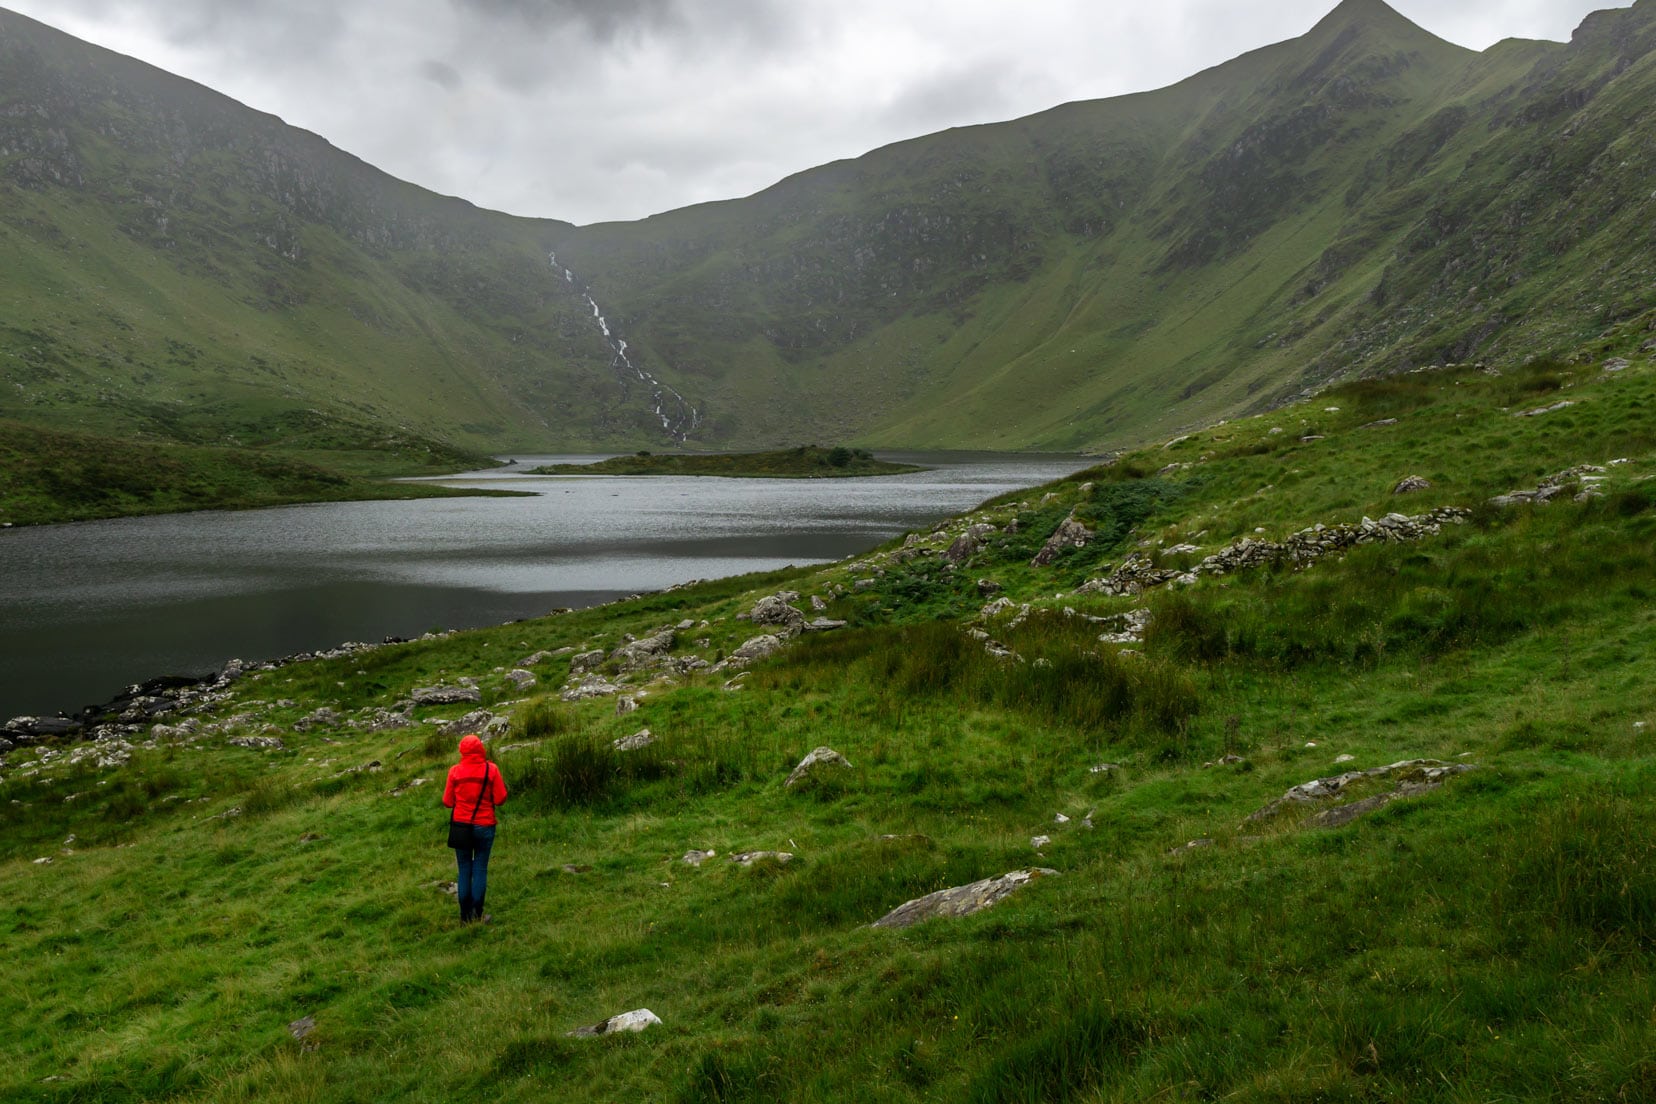 Sheley stood by Lough Adoon - a lake surrounded by lush green hills